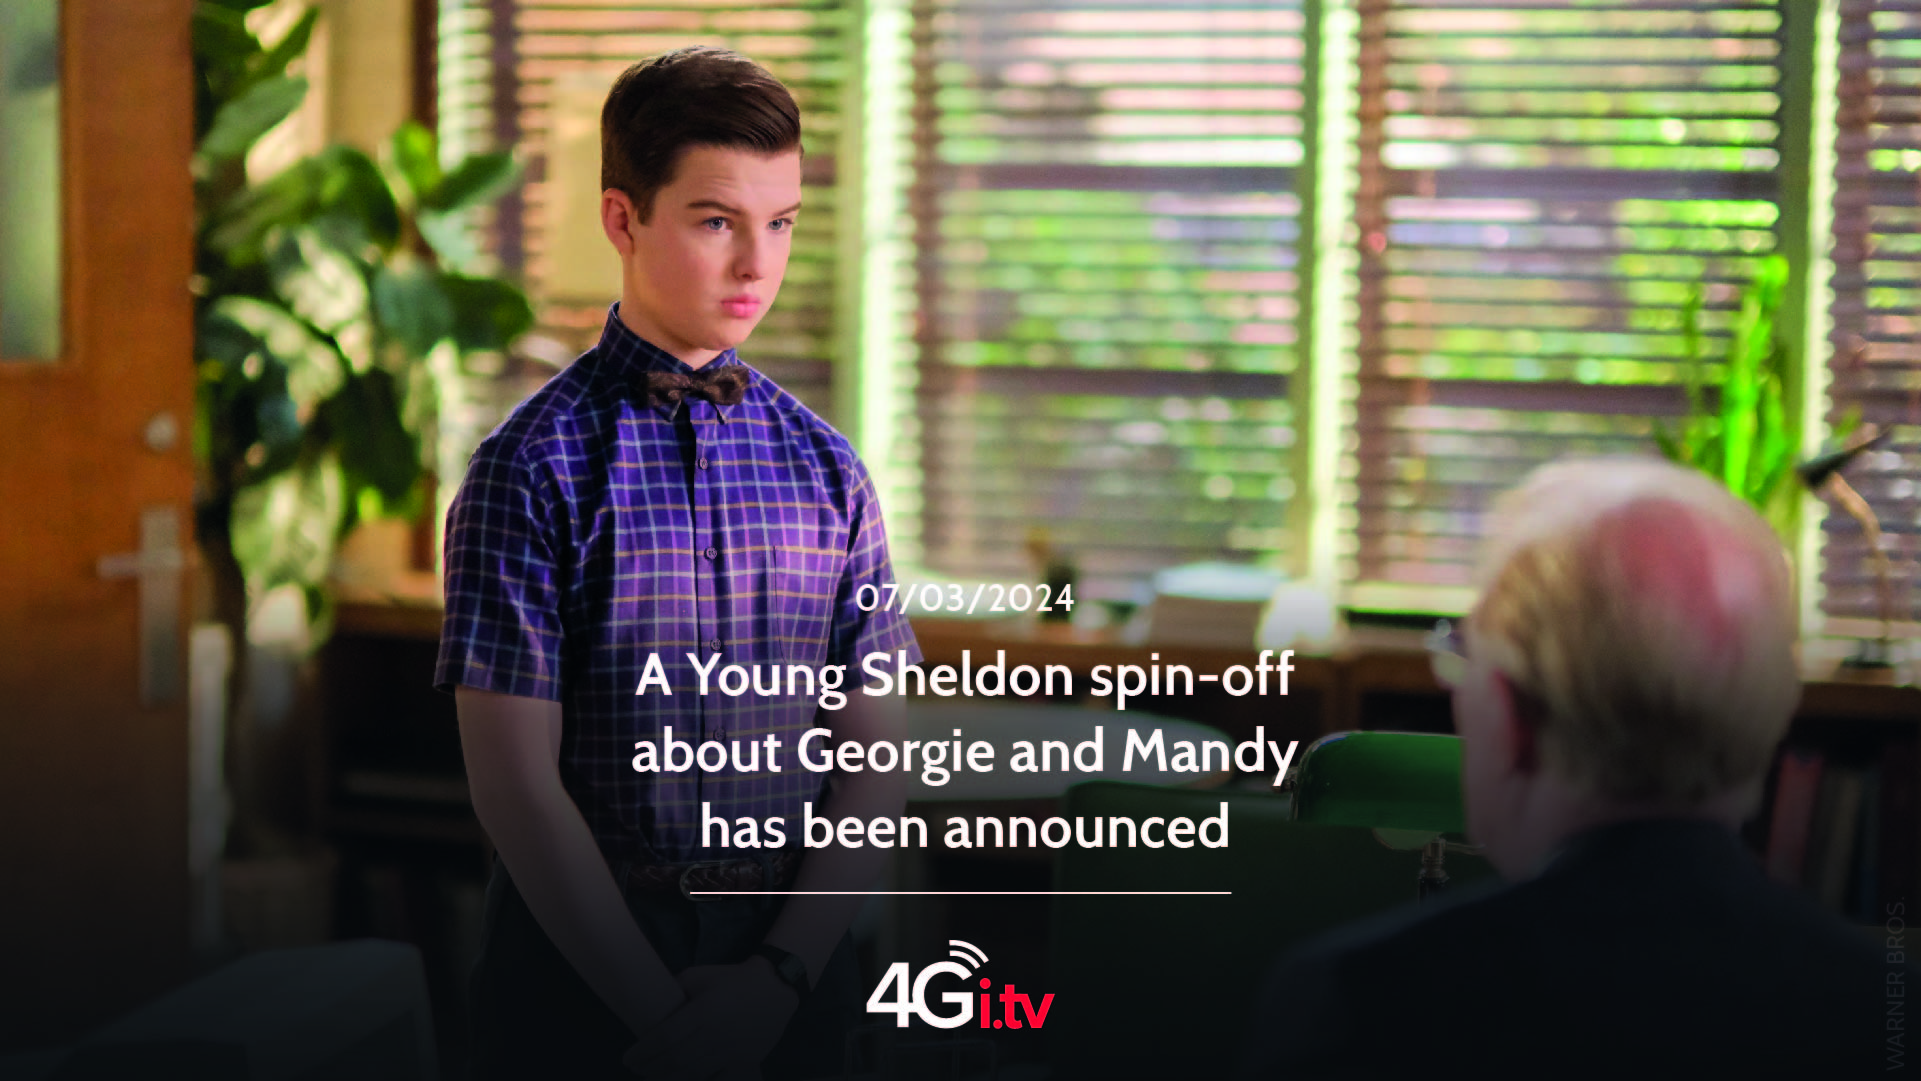 Lesen Sie mehr über den Artikel A Young Sheldon spin-off about Georgie and Mandy has been announced